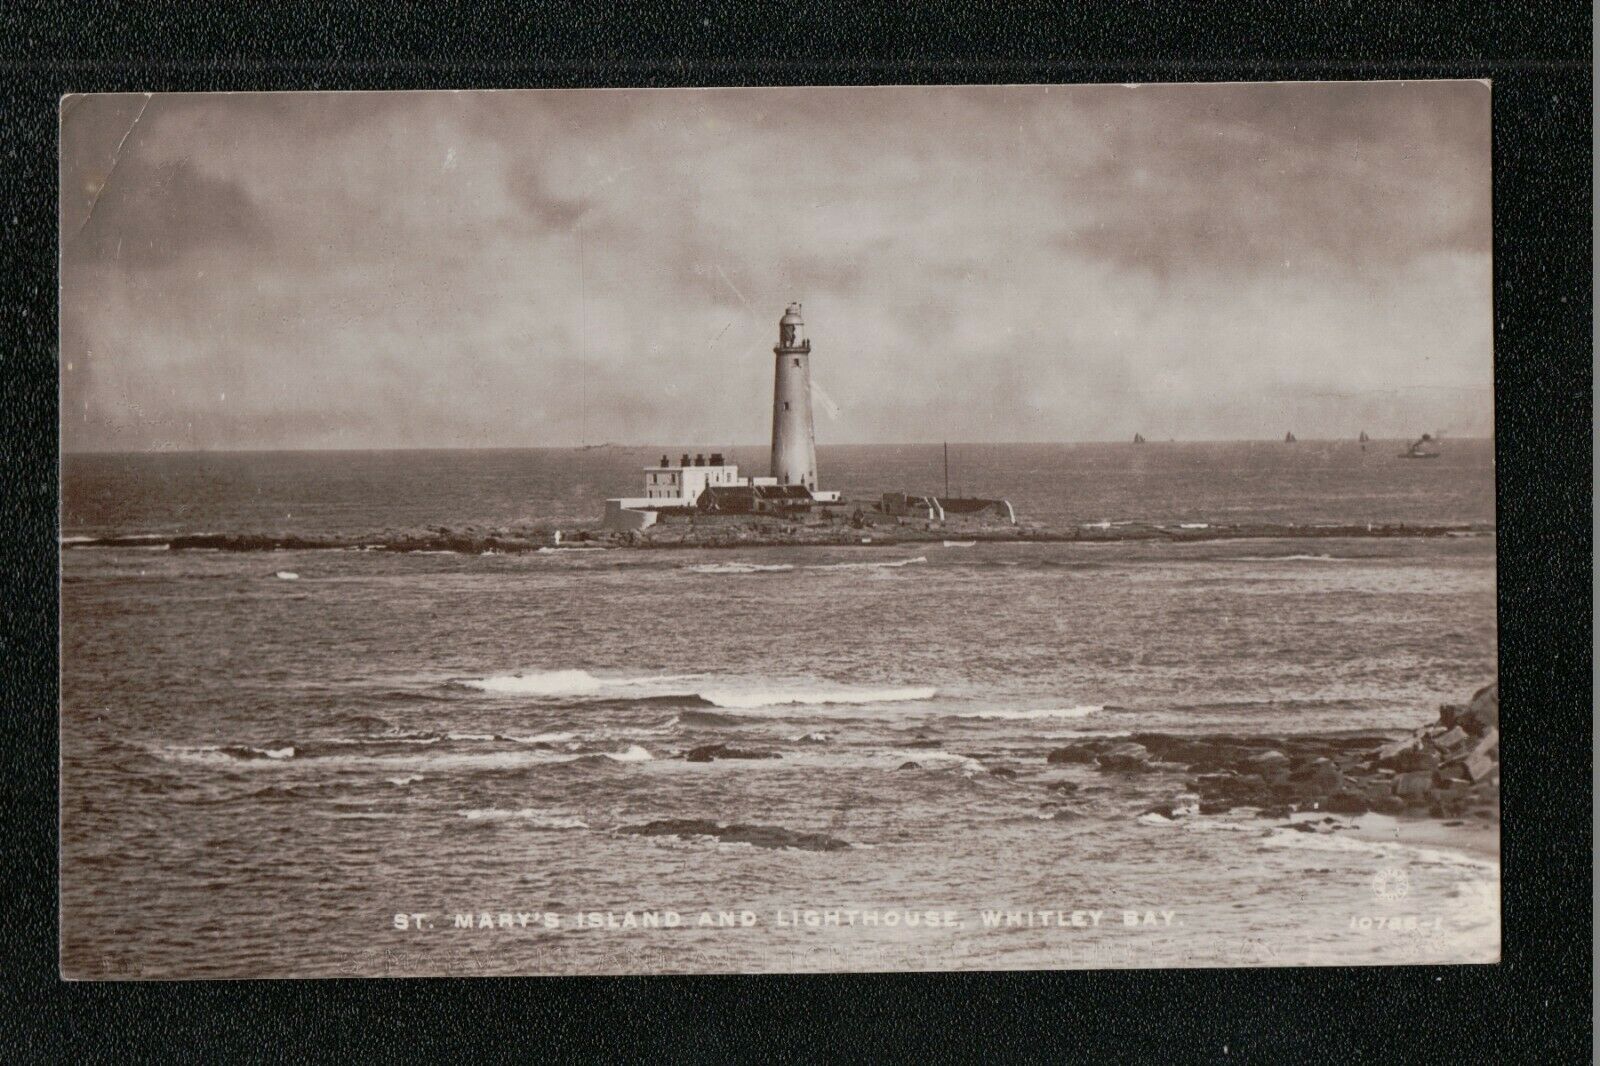 House Clearance - St Mary's Island and Lighthouse Whitley Bay 1923 ? Service